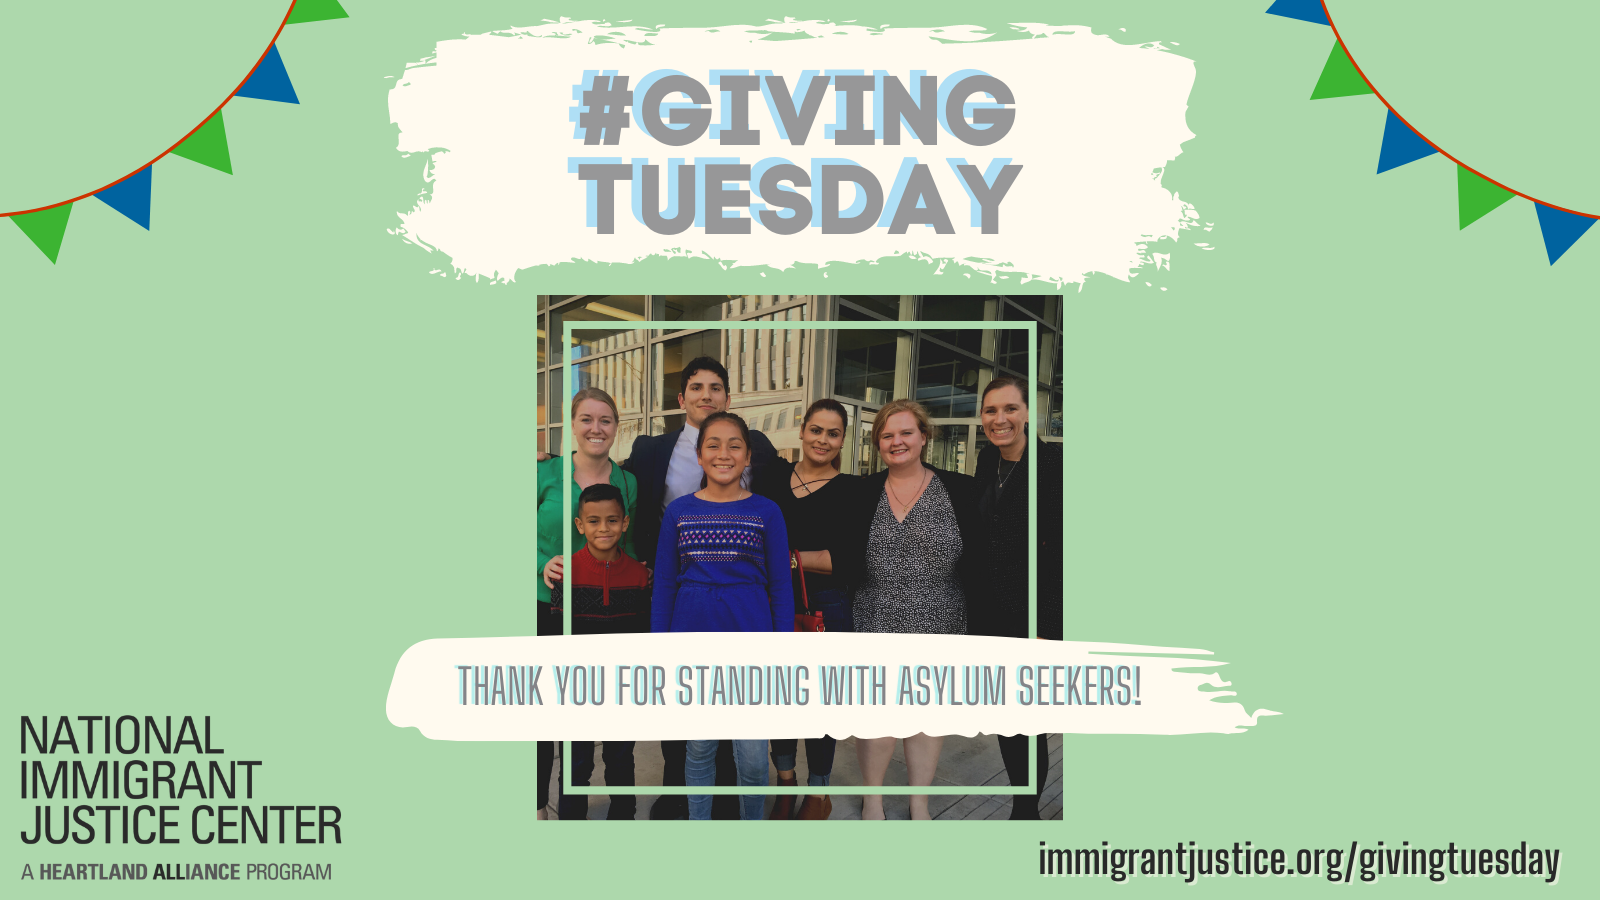 Graphic that says Thank you for protecting asylum seekers on #GivingTuesday. Shows a picture of a mother and two young kids outside the courthouse with their legal representatives after winning asylum. All are smiling.